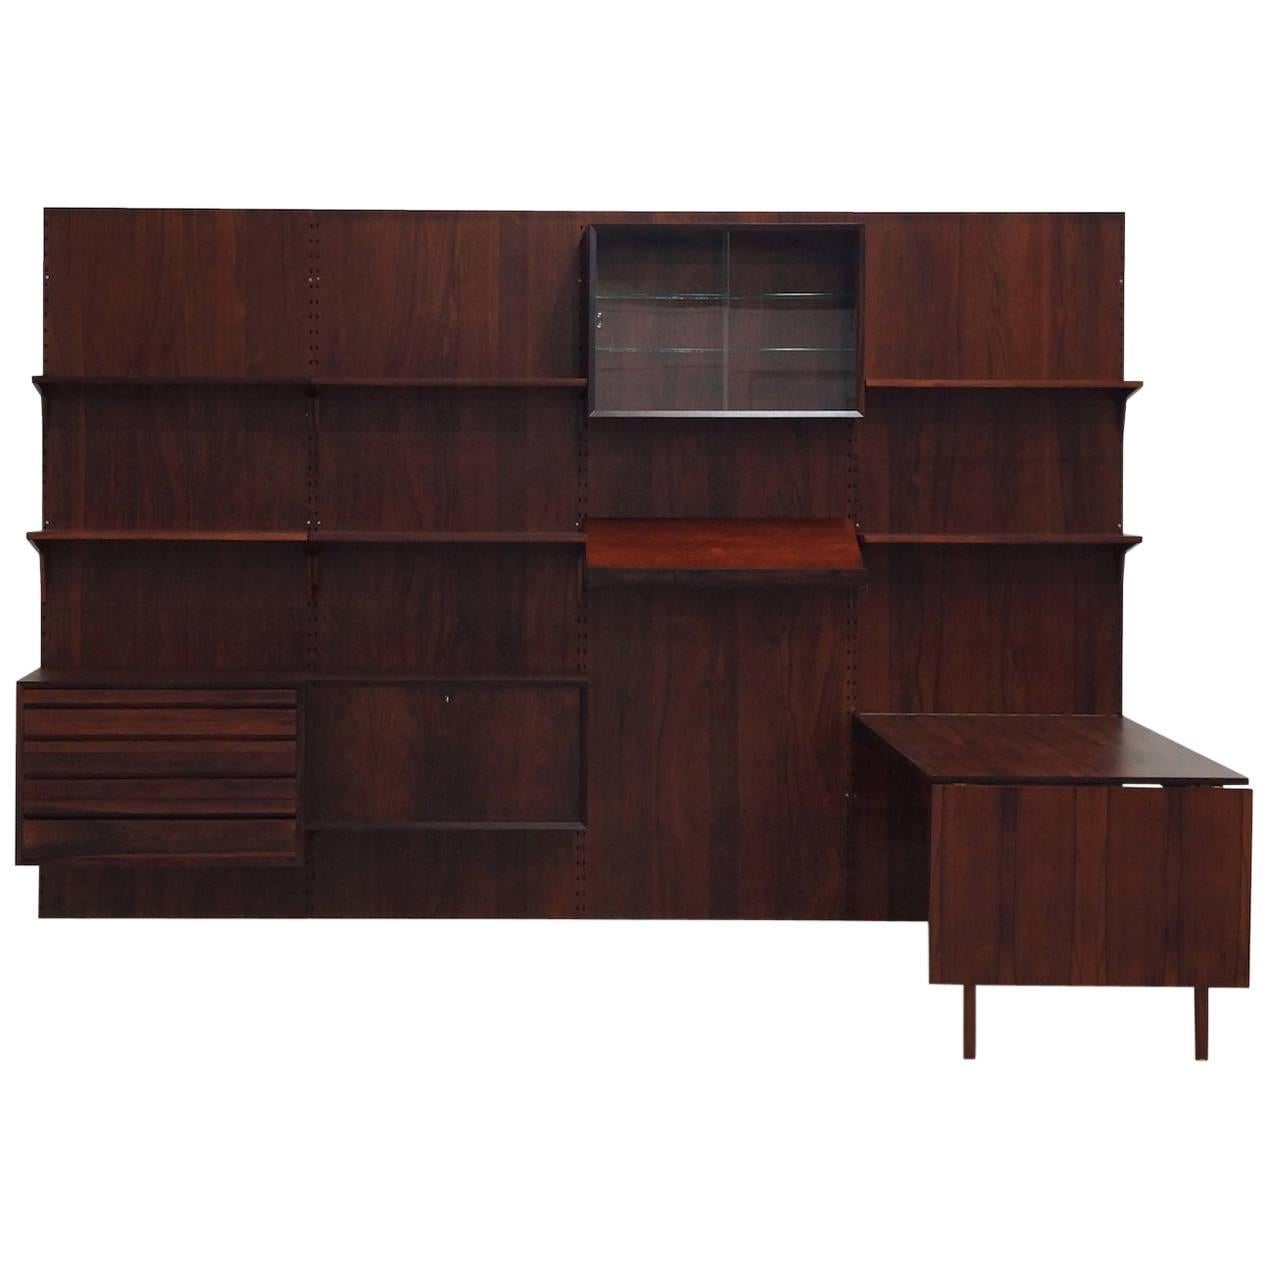 Exclusive Mahogany Modular Wall Unit by Poul Cadovius for Cado, 1950s For Sale